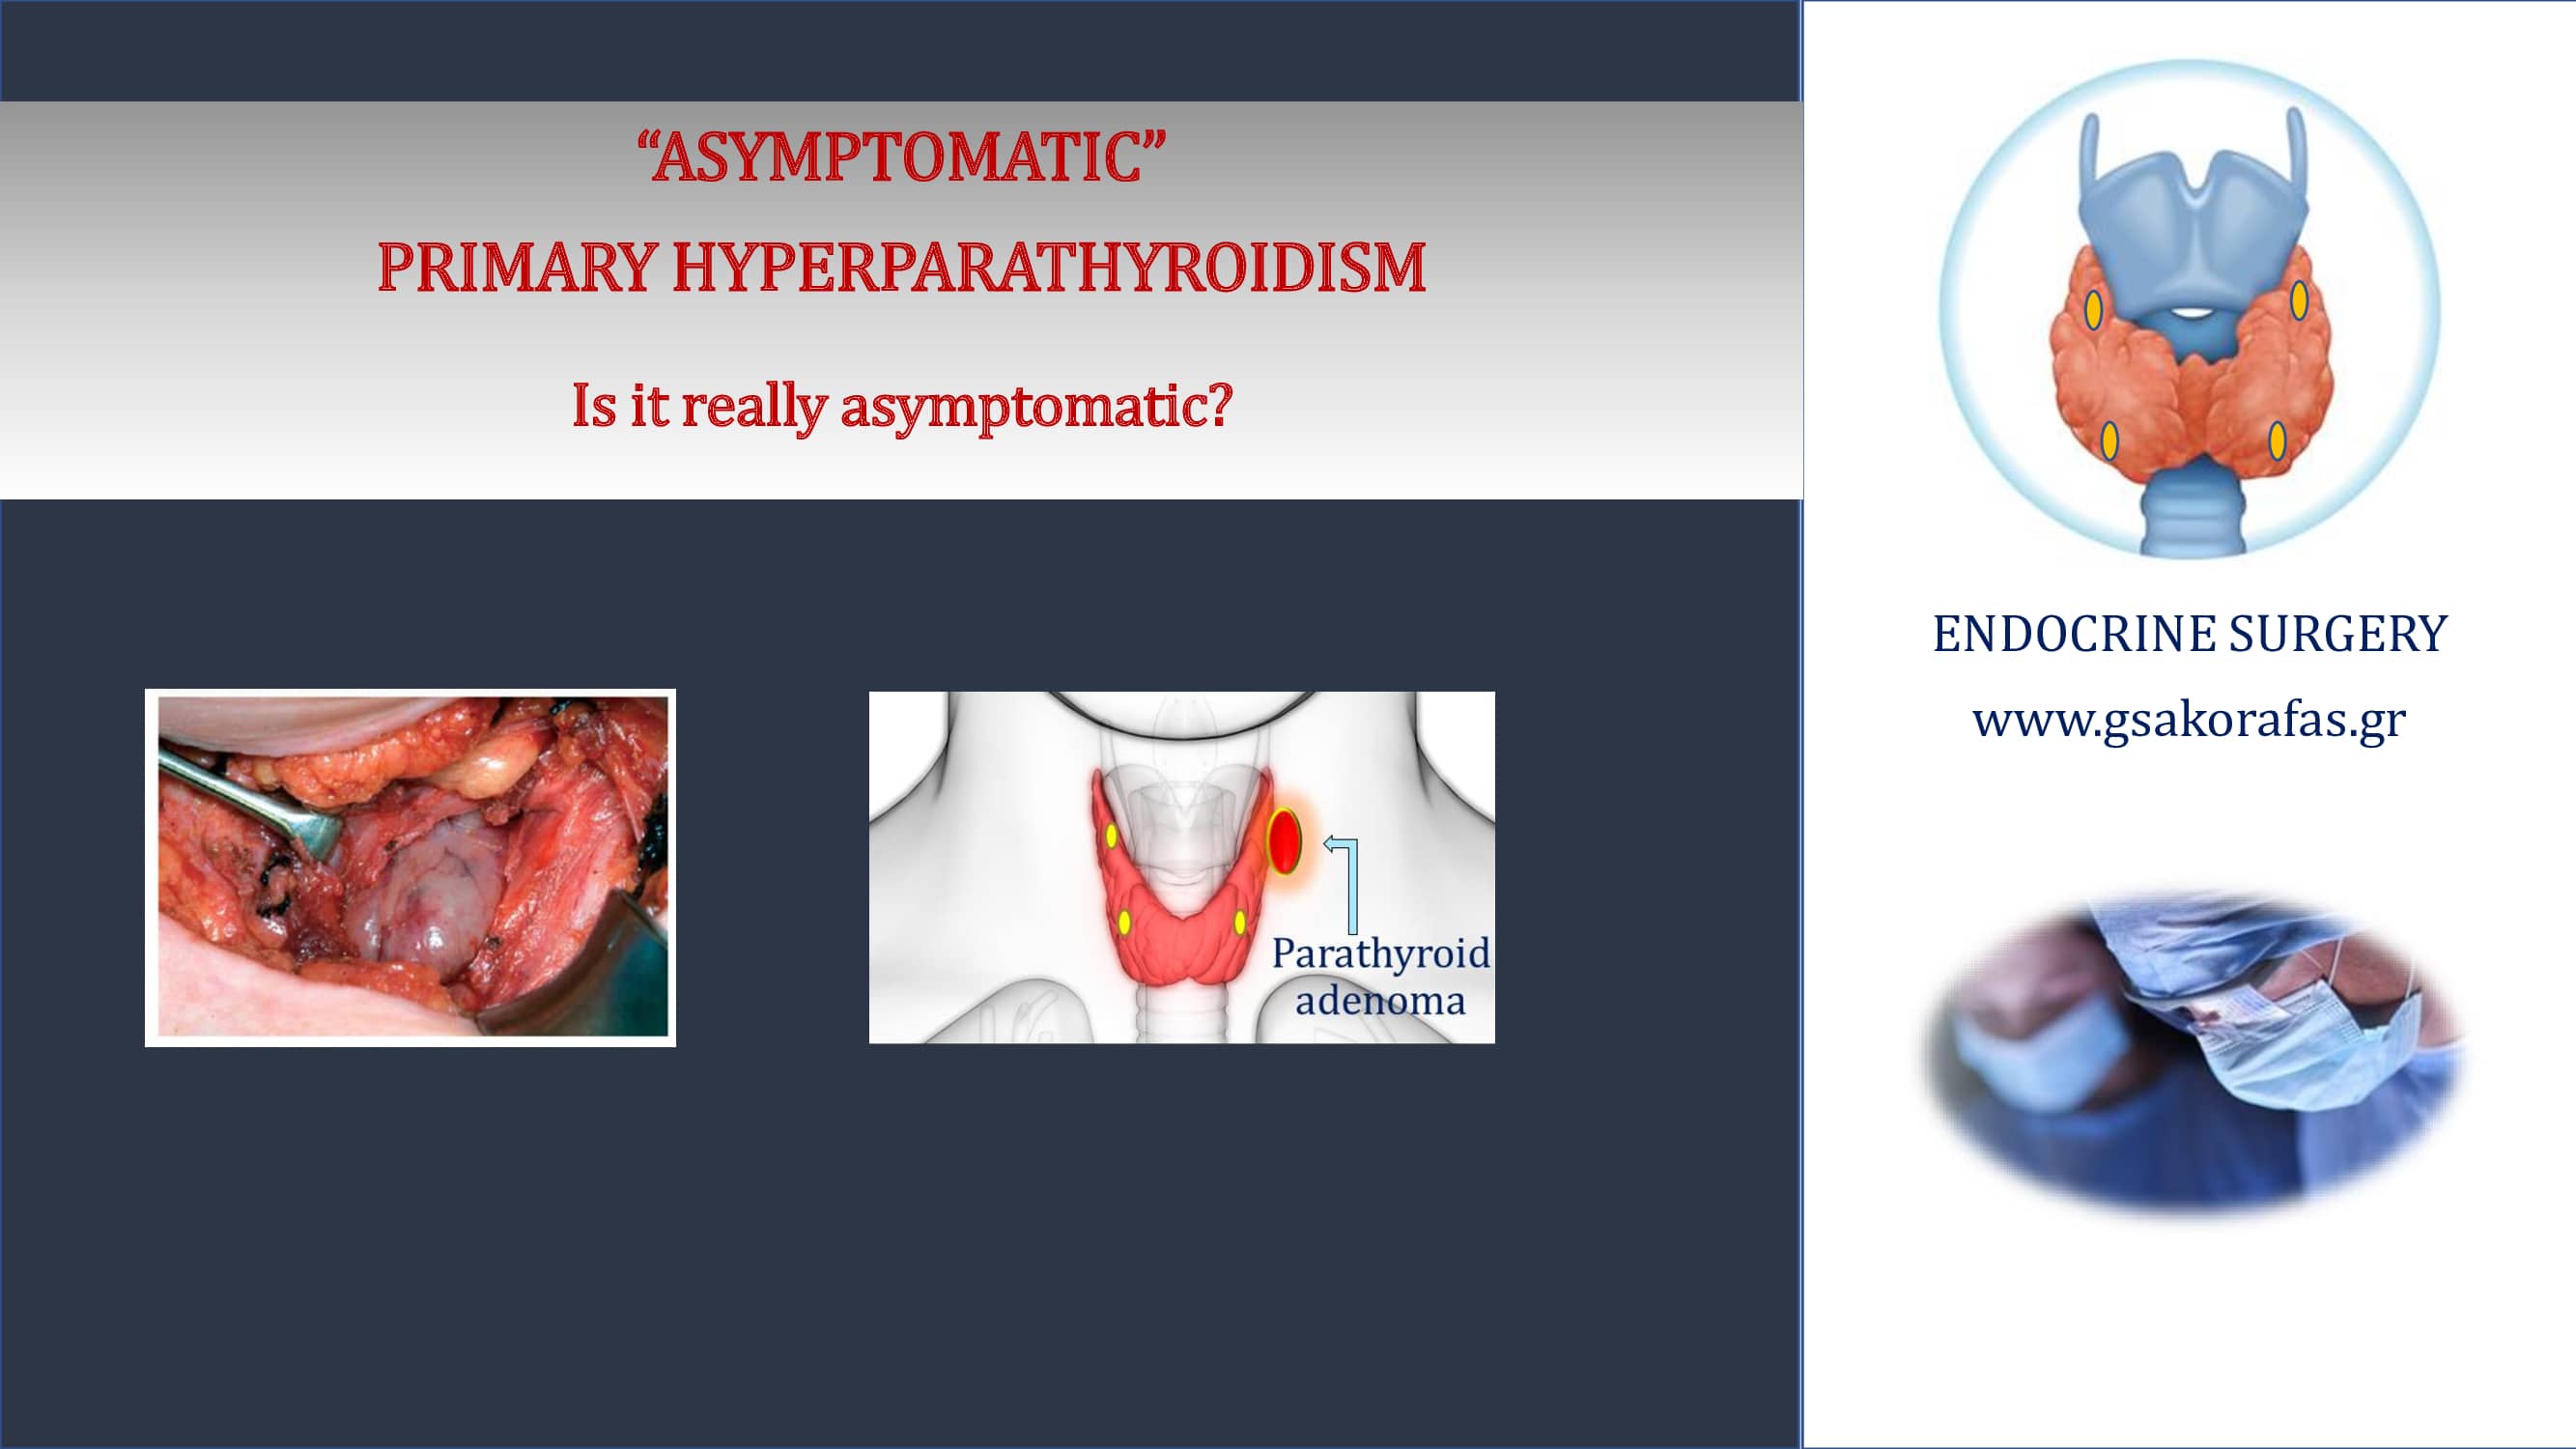 Asymptomatic Primary Hyperparathyroidism – Is is really “asymptomatic”?